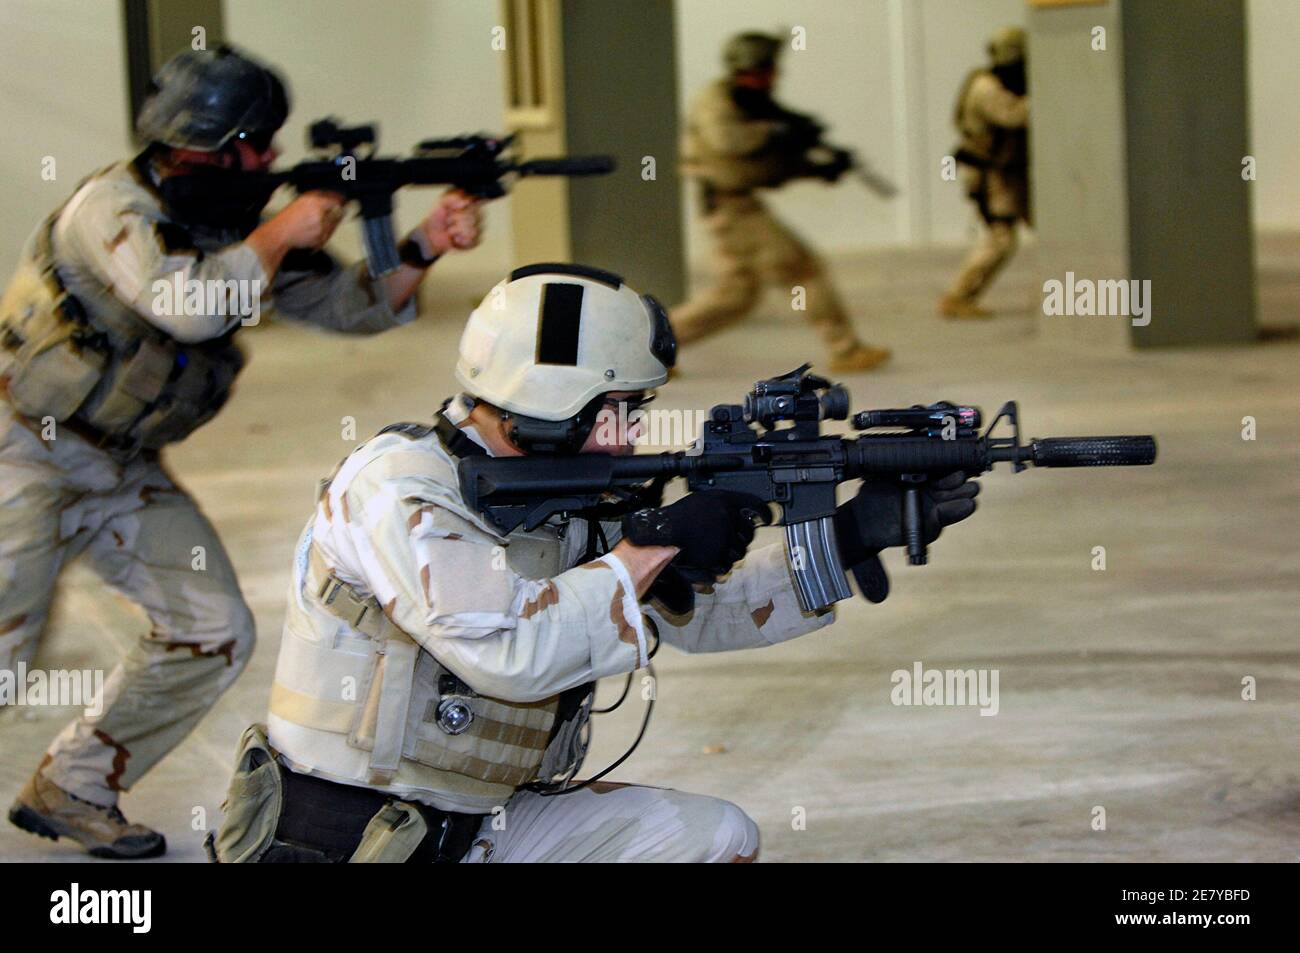 VIRGINIA BEACH, Va. (June 5, 2007) - U.S. Navy SEALs (Sea, Air, Land) perform a live fire exercise for the Secretary of the Navy (SECNAV) The Honorable Dr. Donald C. Winter at the Naval Amphibious Base Little Creek's shooting facility. US Navy SEALs, legendarily tough, secretive specialists, led the bold commando operation in Pakistan that took down the world's most wanted man: 9/11 mastermind Osama bin Laden, US officials said. Photo by US Navy via ABACAPRESS.COM Stock Photo